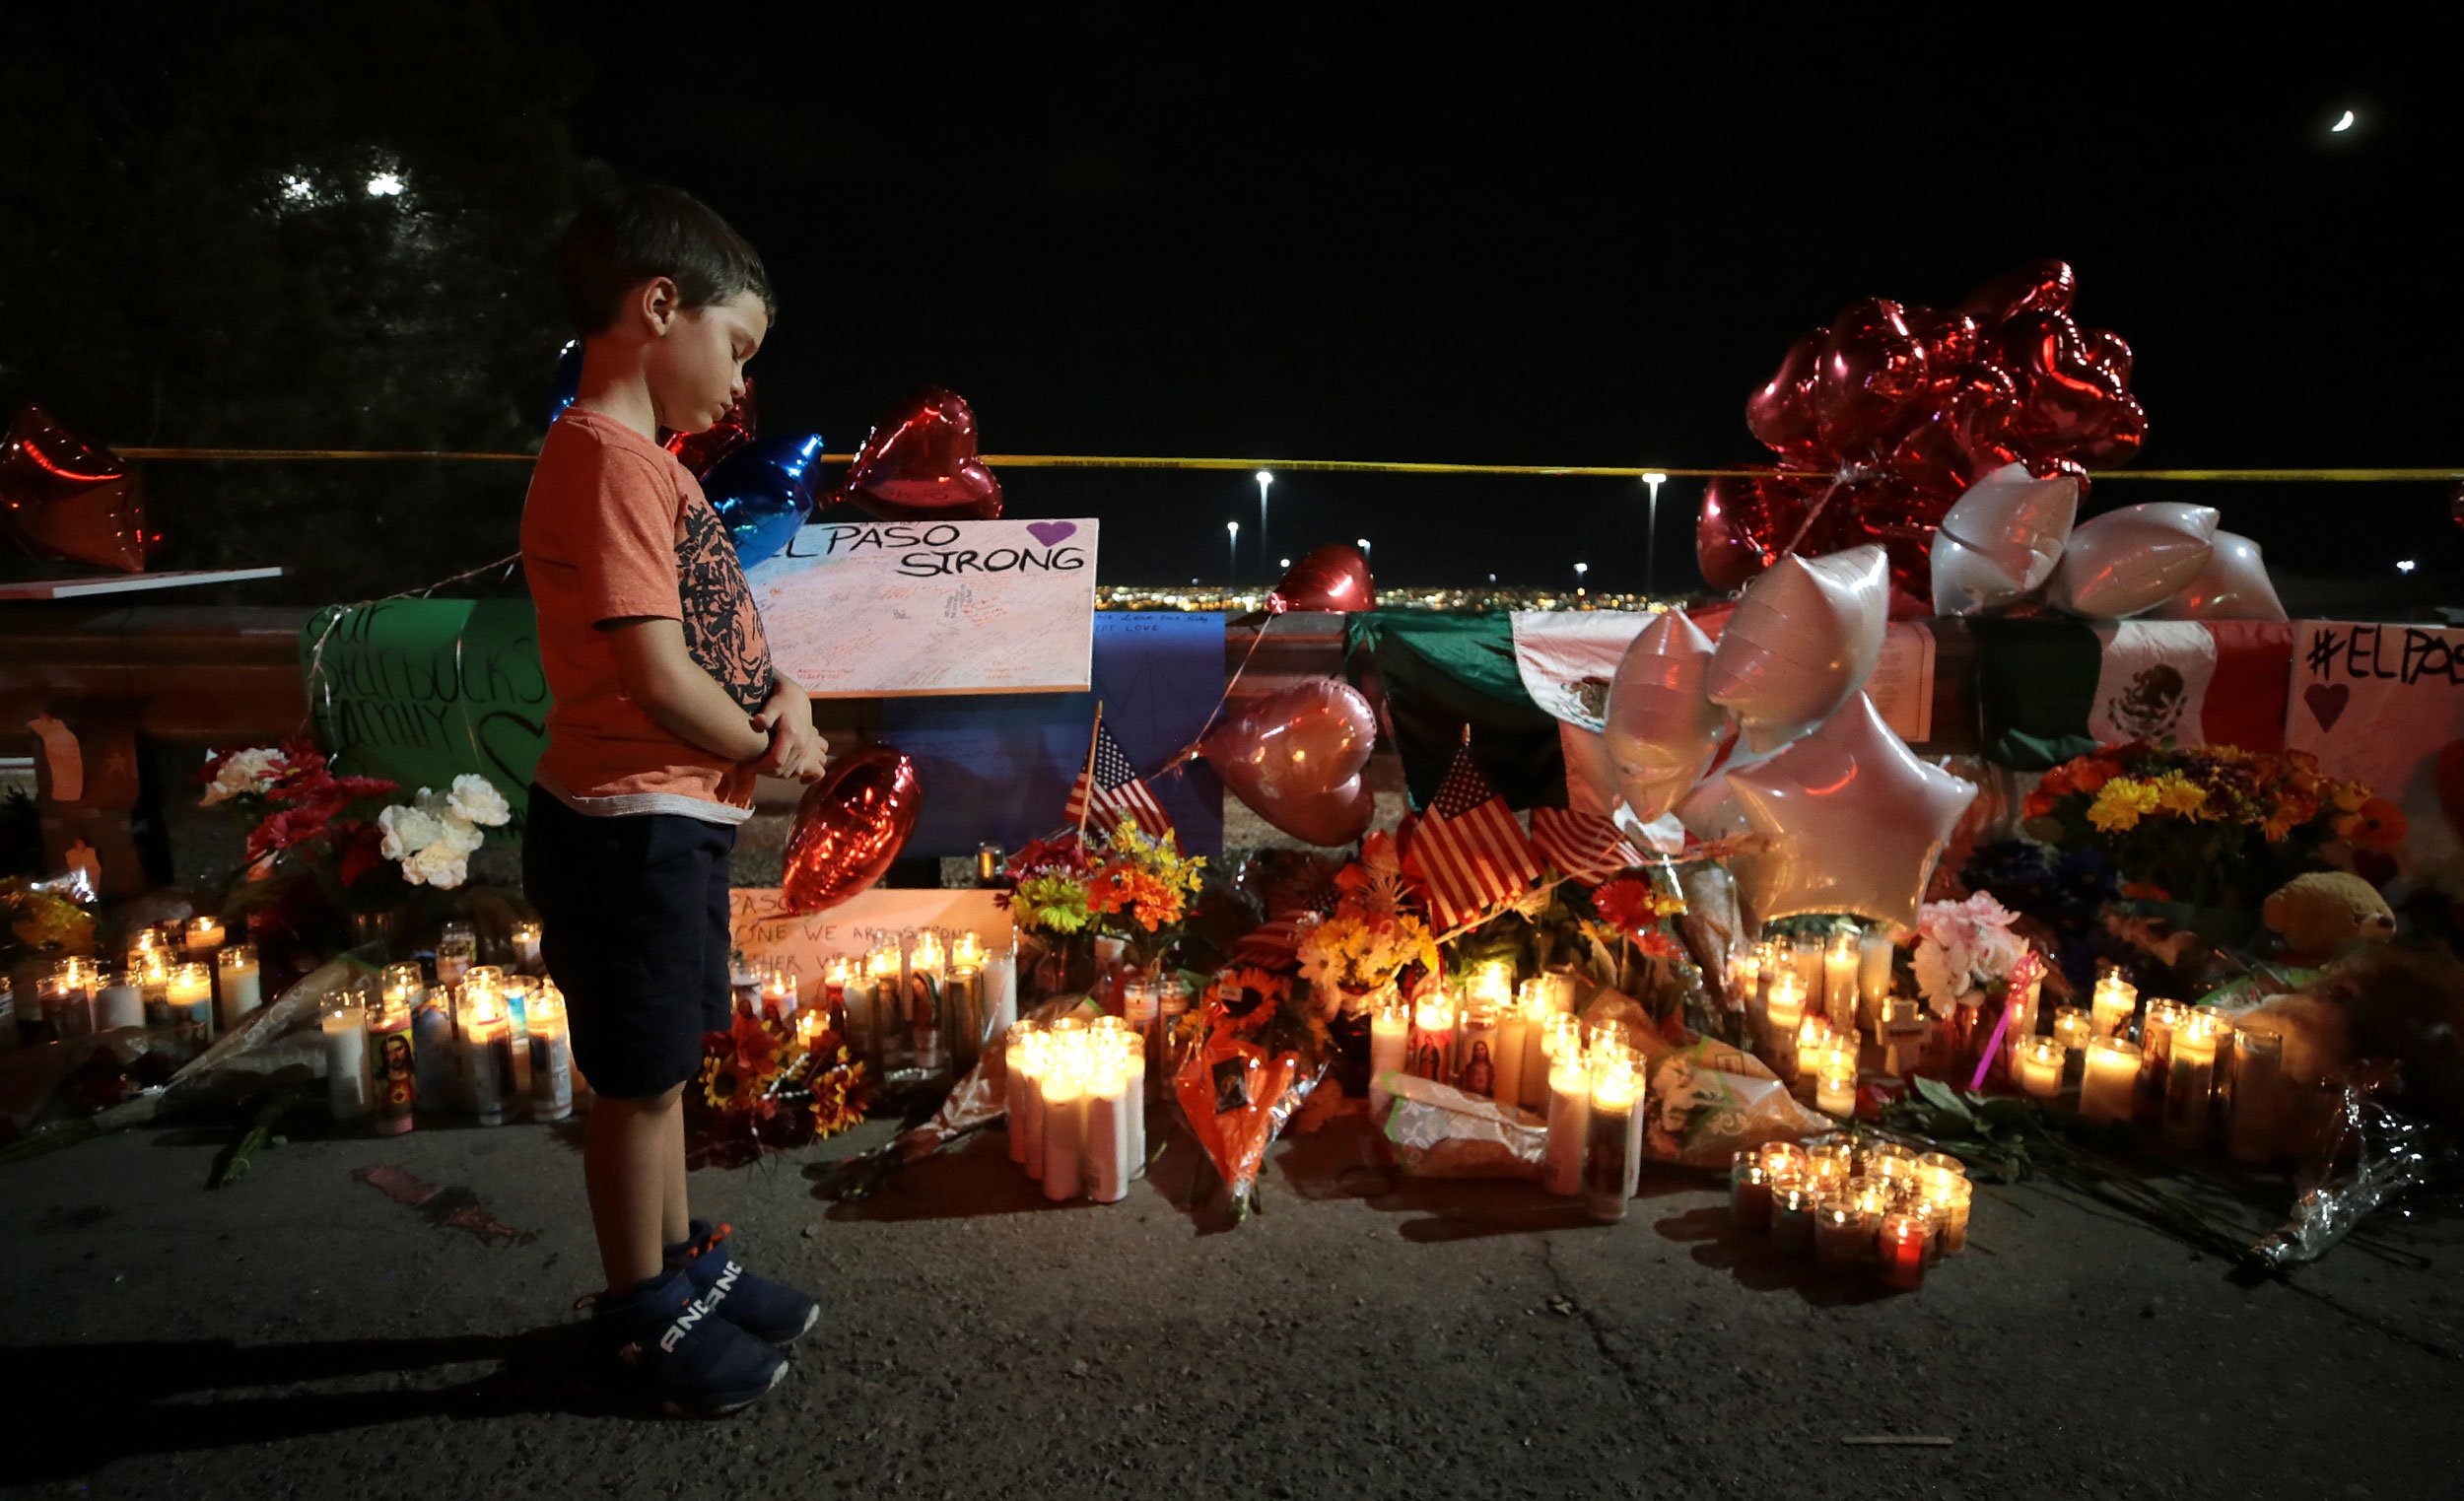 A boy reacts as he looks at teddy bears left for children killed.